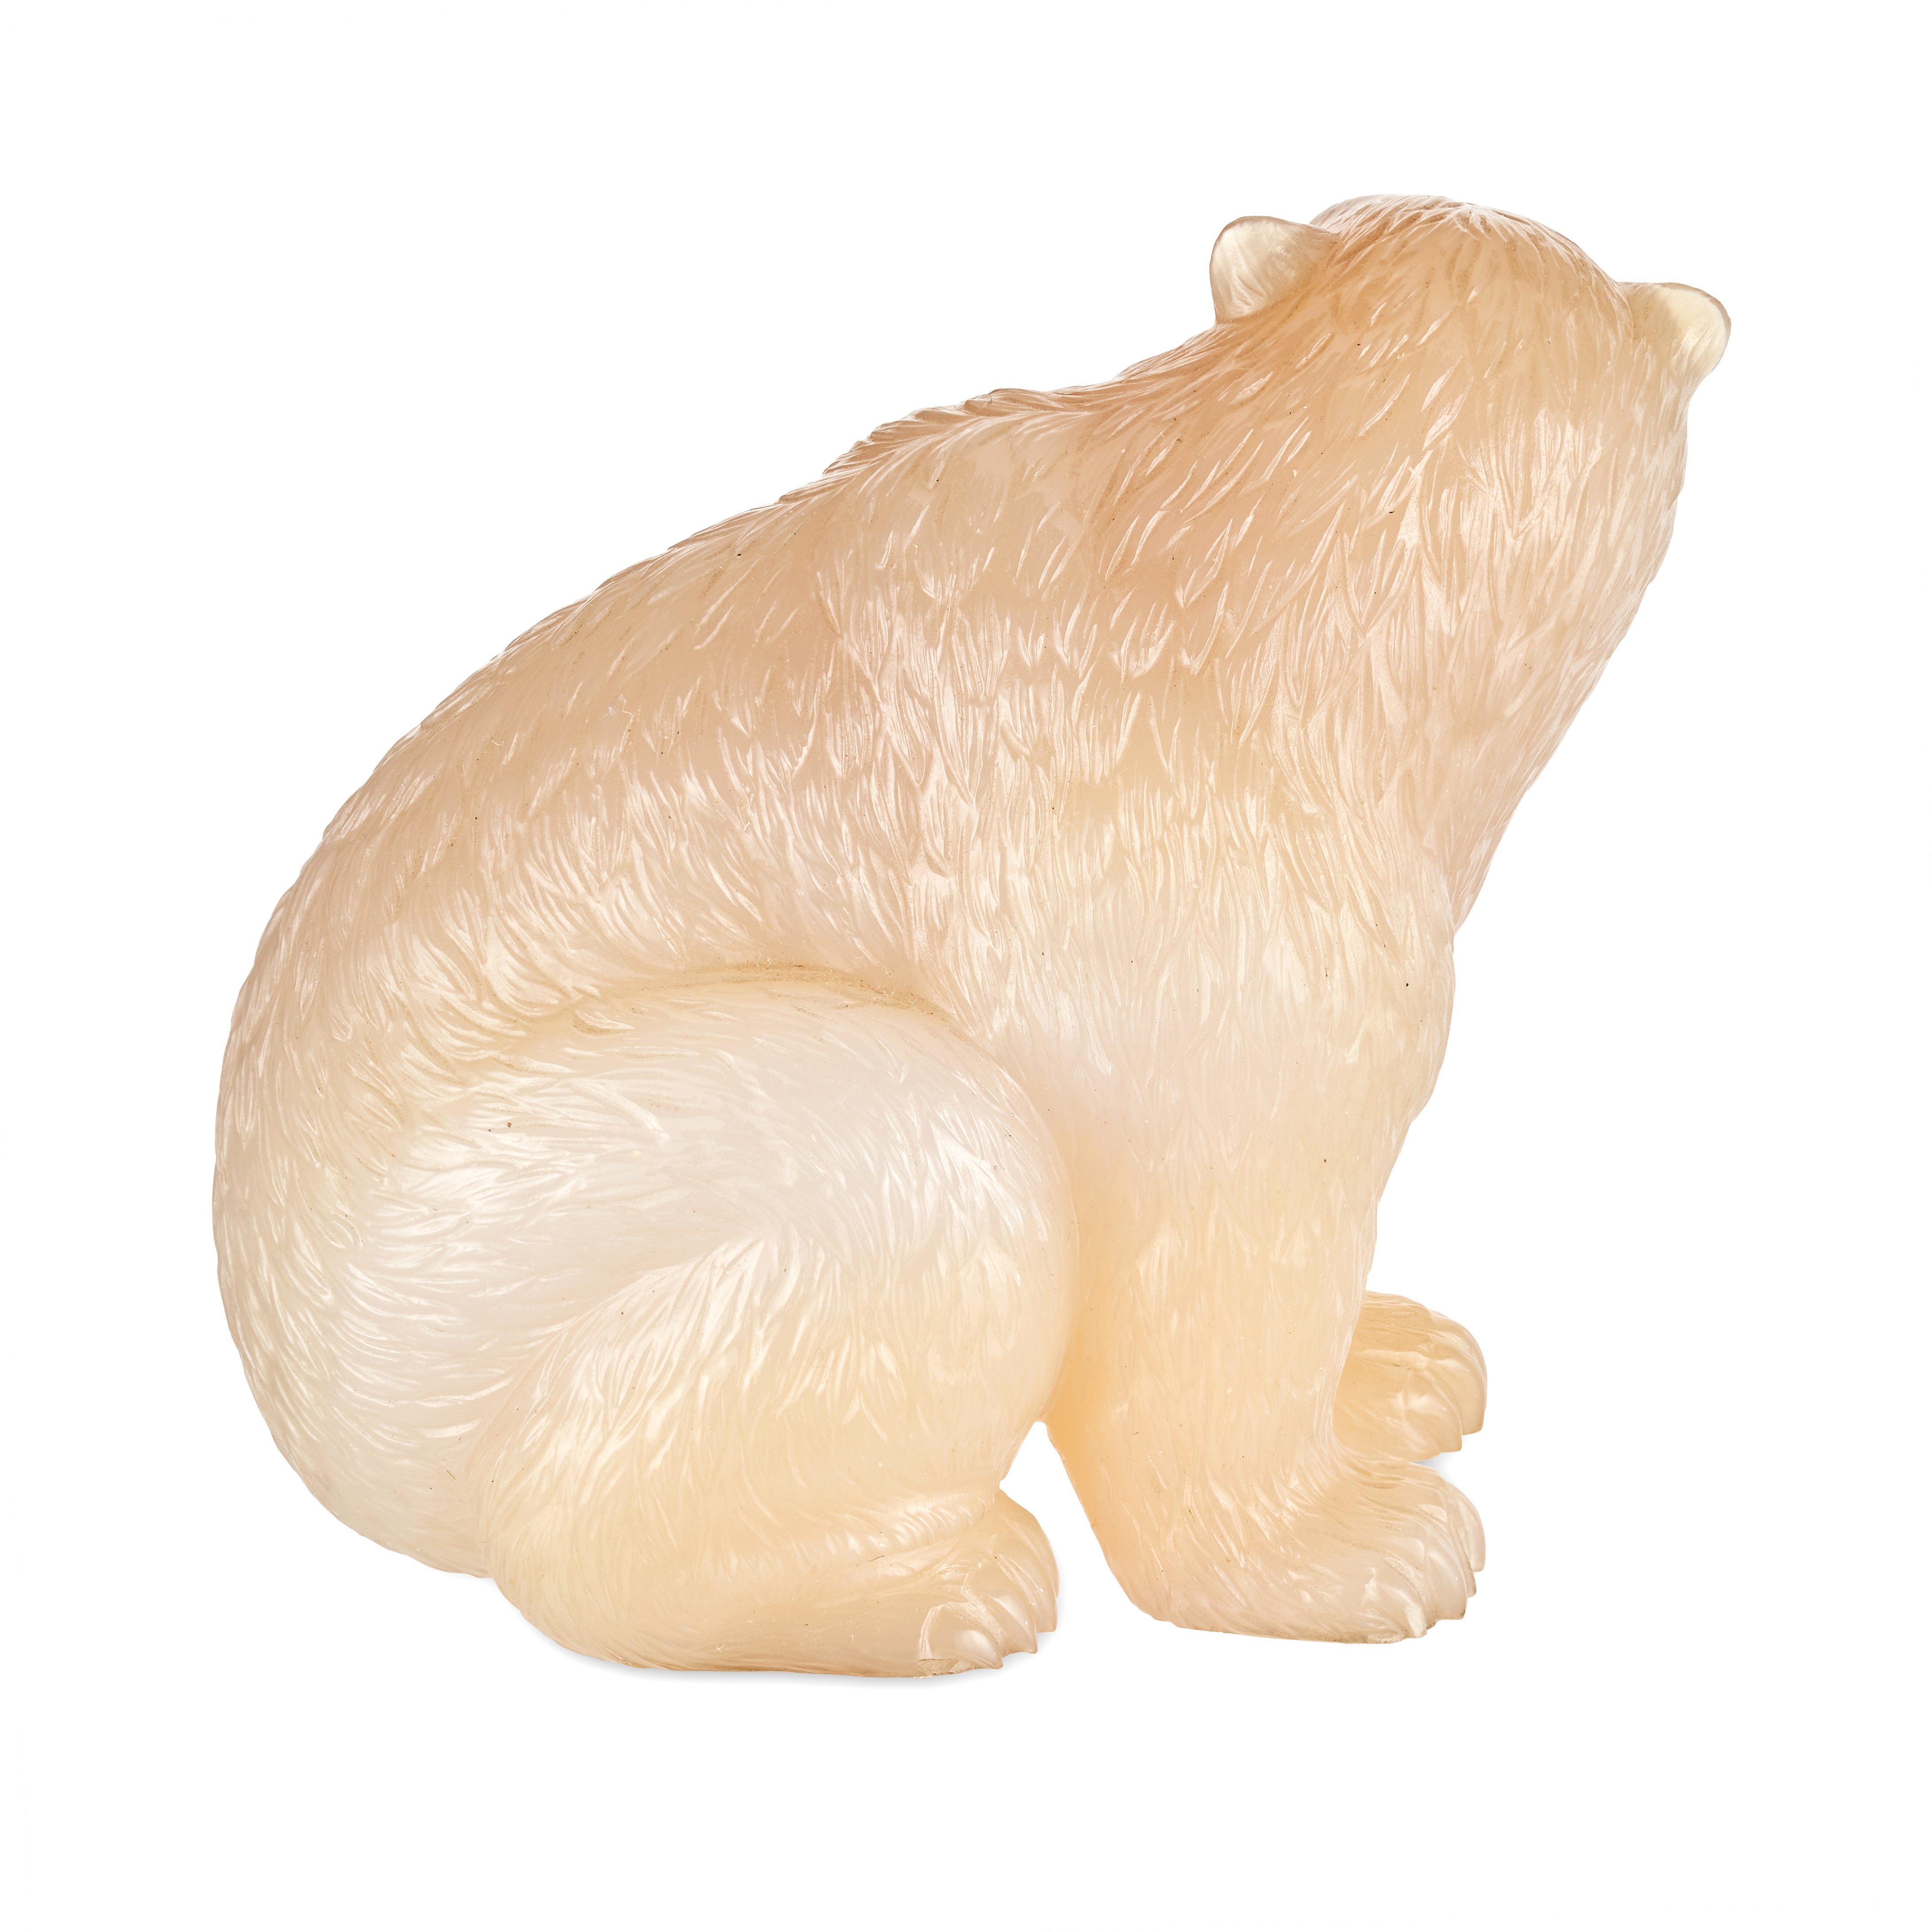 FABERGE, A RARE JEWELLED AGATE MODEL OF A POLAR BEAR, ST PETERSBURG, CIRCA 1900 - Image 7 of 10